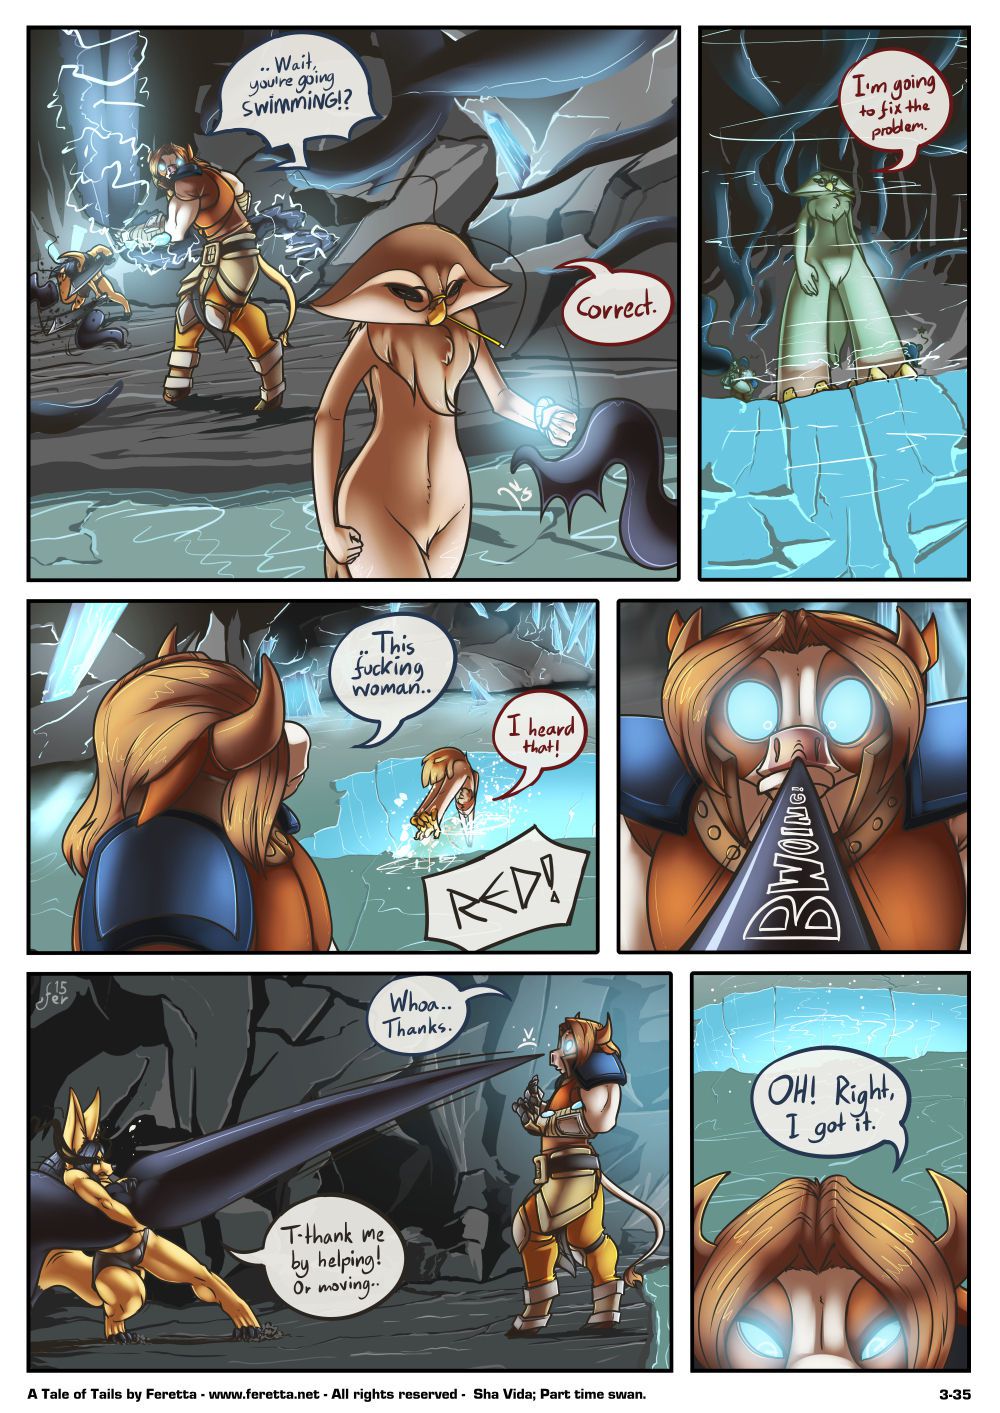 [Feretta] Farellian Legends: A Tale of Tails (w/Extras) [Ongoing] 124